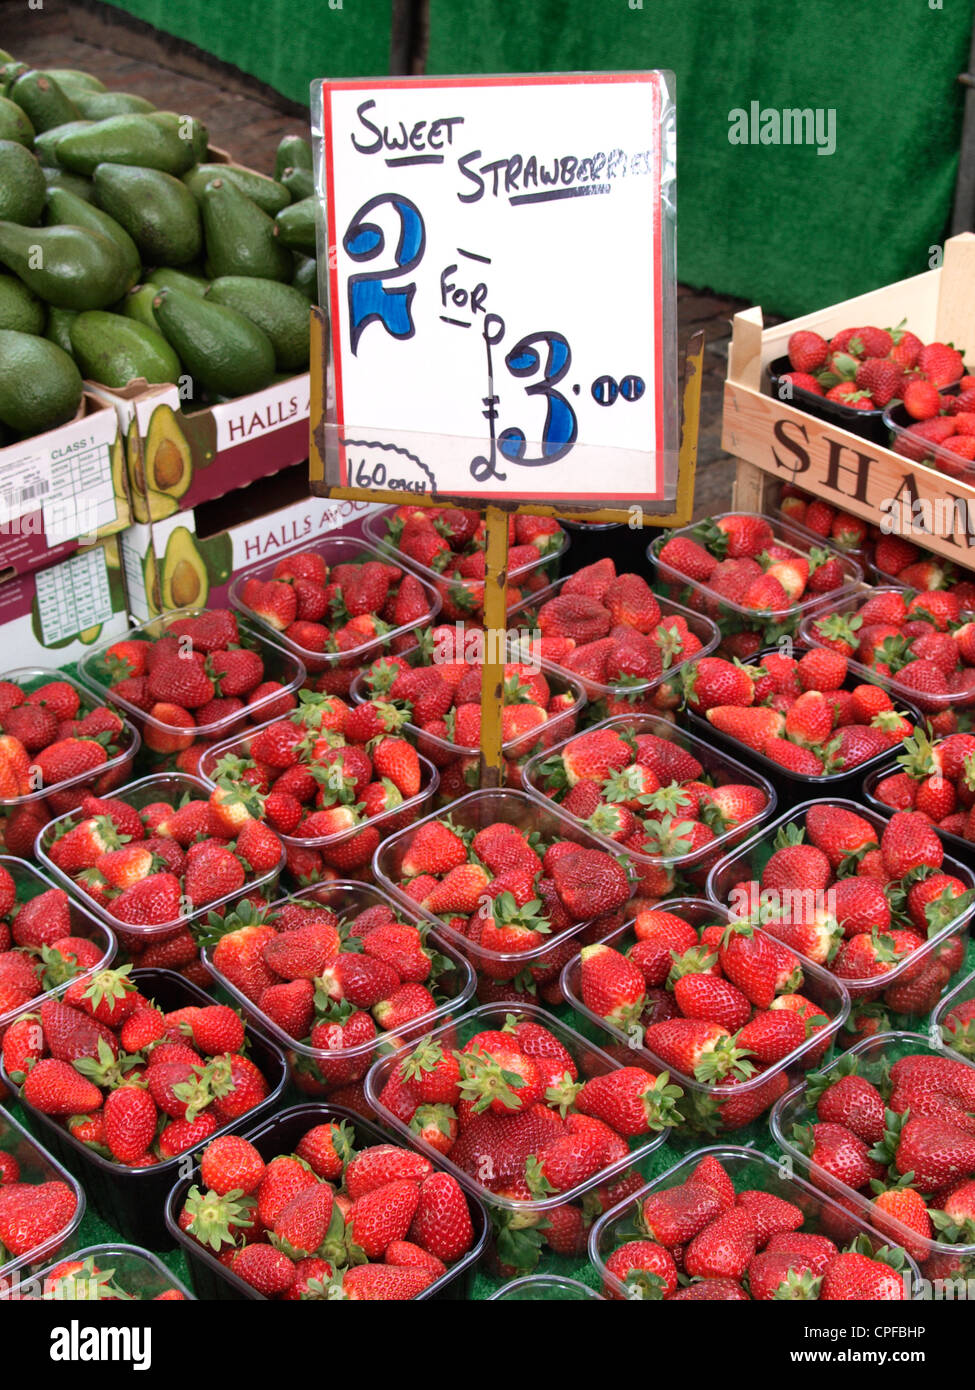 Strawberries for sale on a fruit and veg market stall, Cambridge, UK Stock Photo